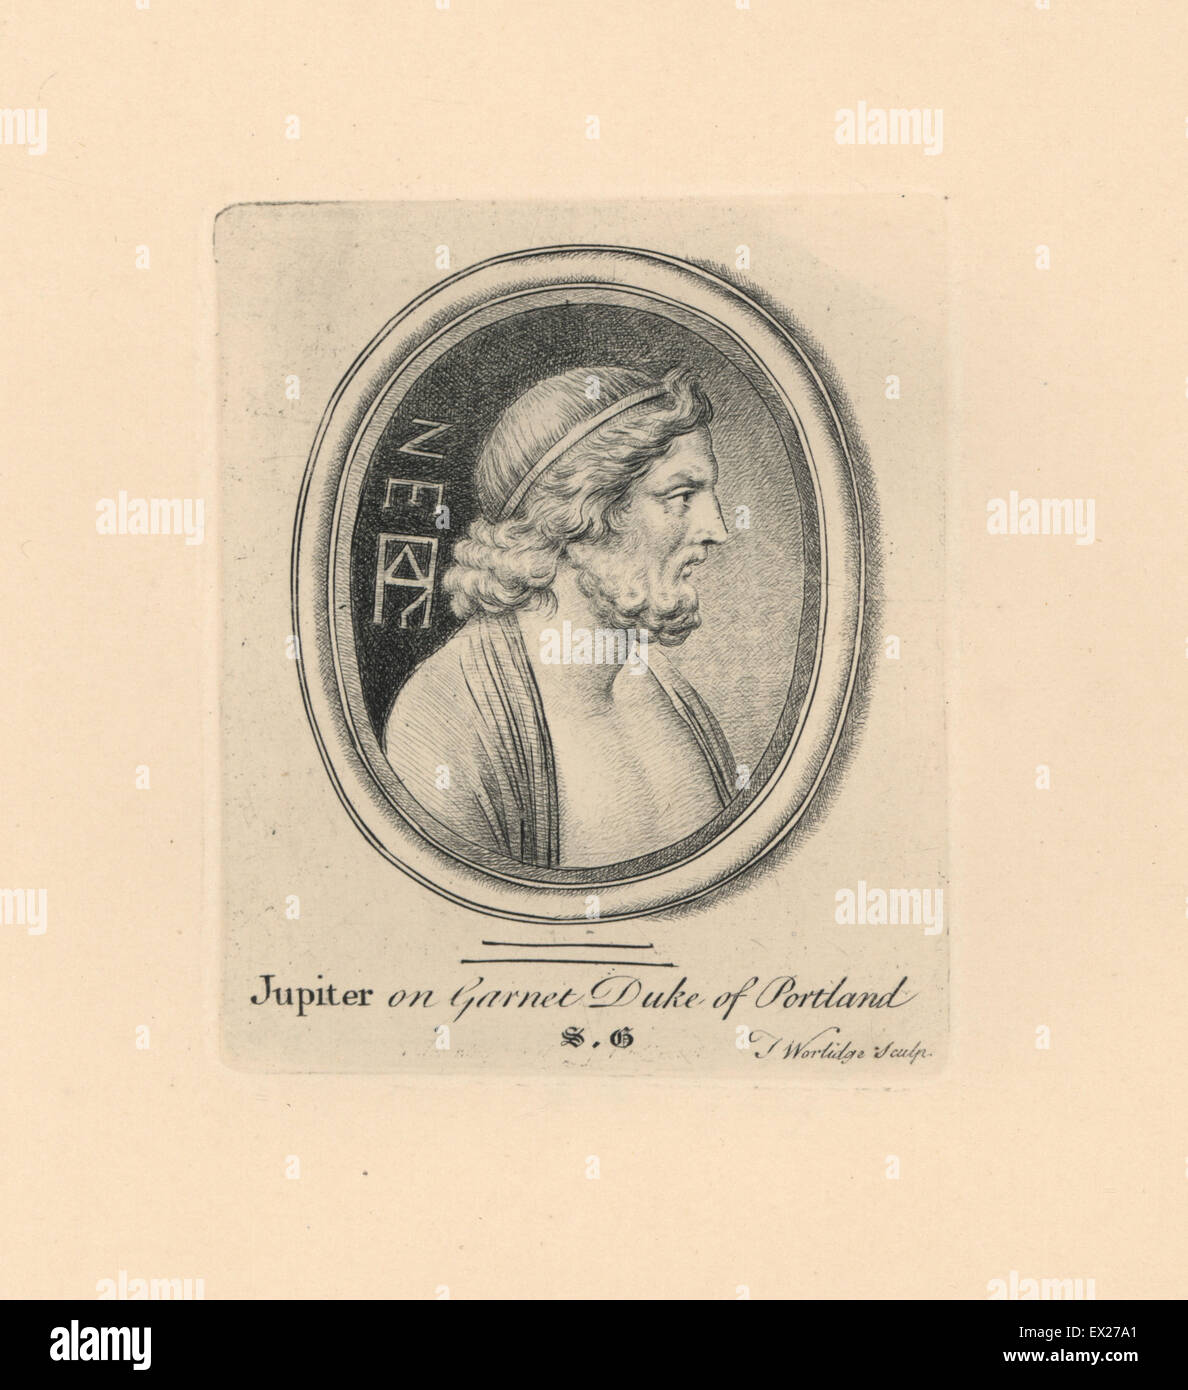 Portrait of Jupiter or Jove, Roman deity, with diadem, on garnet from the collection of the Duke of Portland. Copperplate engraving by Thomas Worlidge from James Vallentin's One Hundred and Eight Engravings from Antique Gems, 1863. Stock Photo